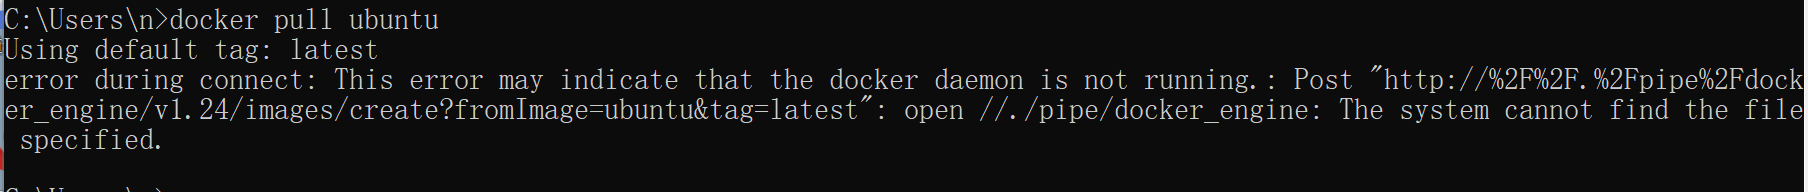 windows环境下使用docker pull 提示：Using default tag: latest error during connect: This error may indicate that the docker daemon is not running.: Post 